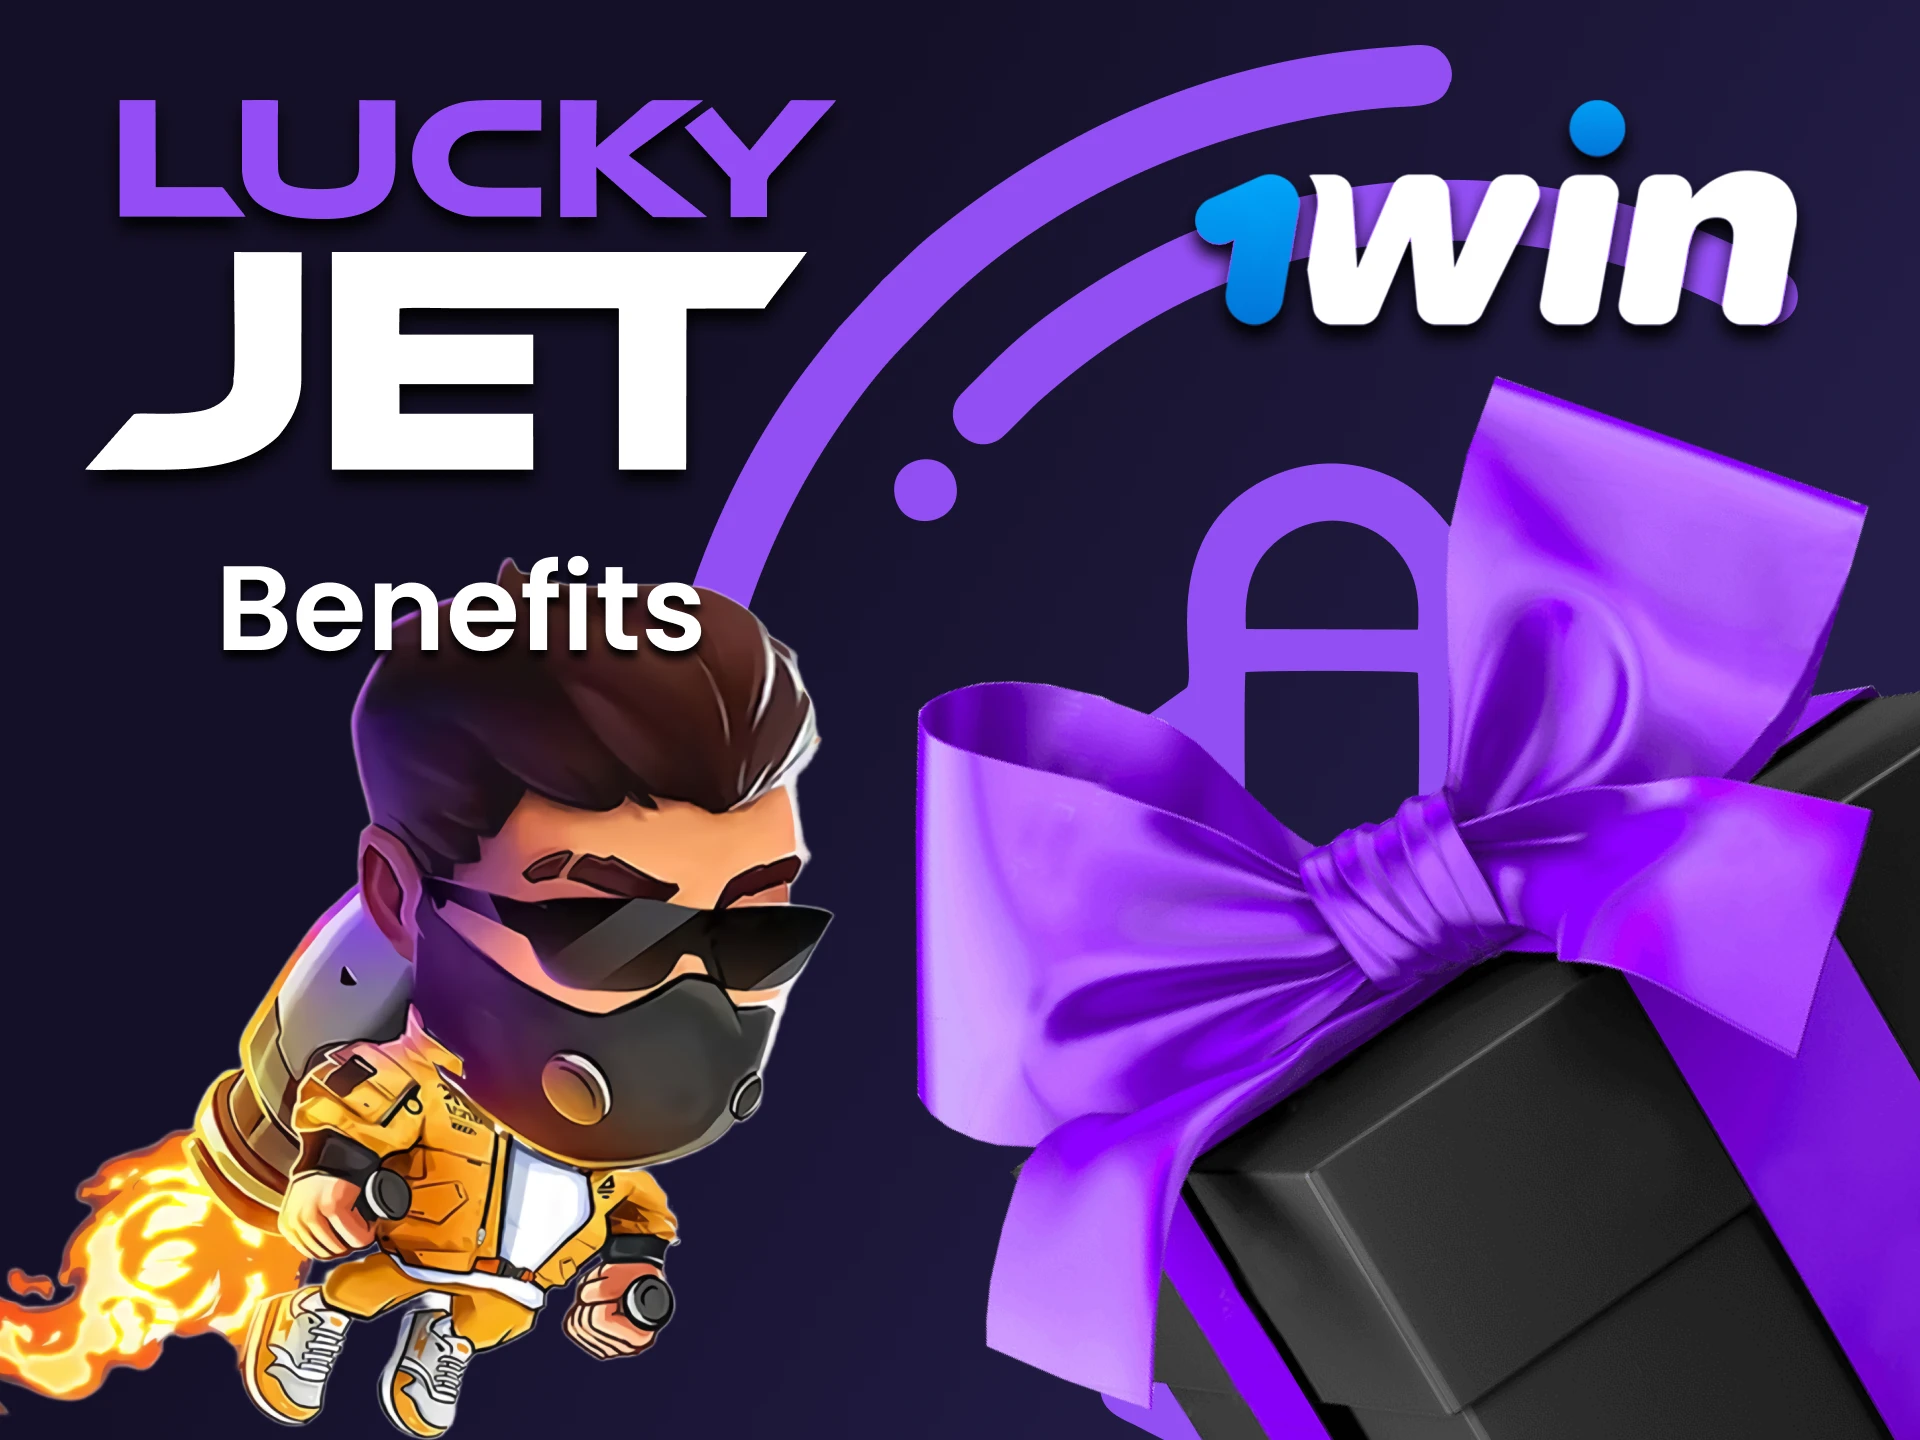 Learn about the benefits of 1win in the Lucky Jet game.